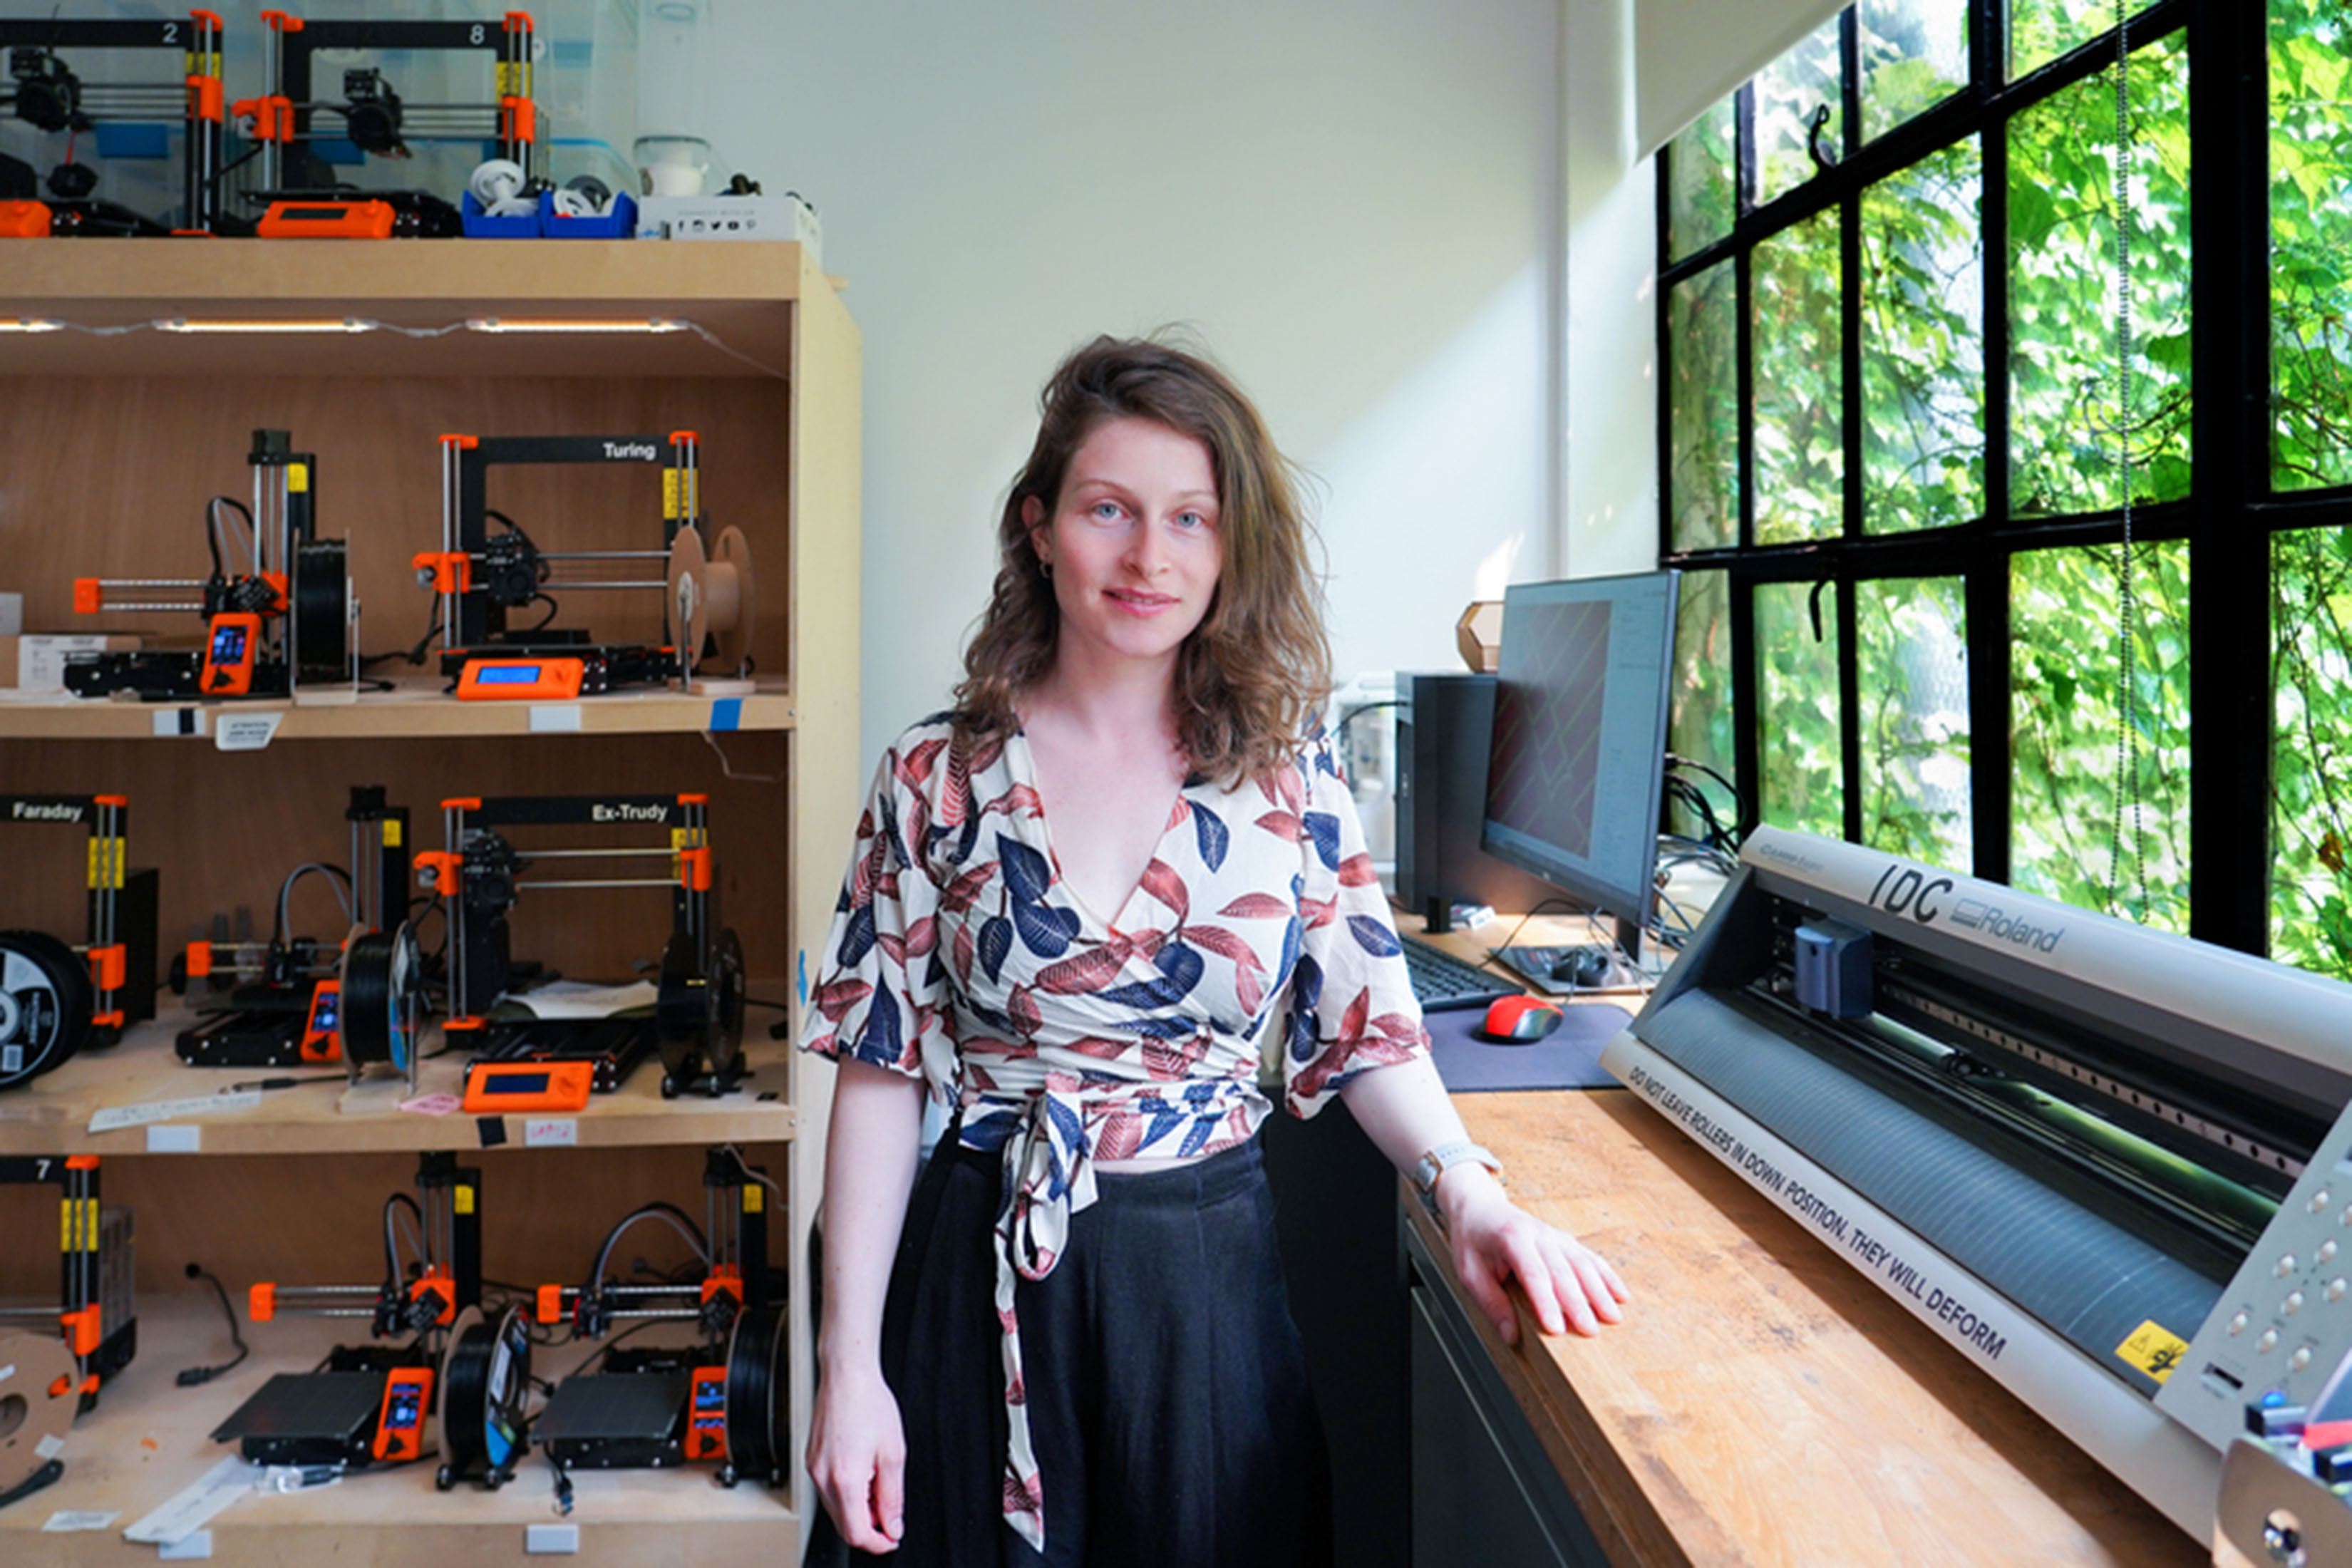 Ganit Goldstein stands in one of MIT's makerspaces. 3D printers are visible in the background. A wall of windows shows greenery outside.